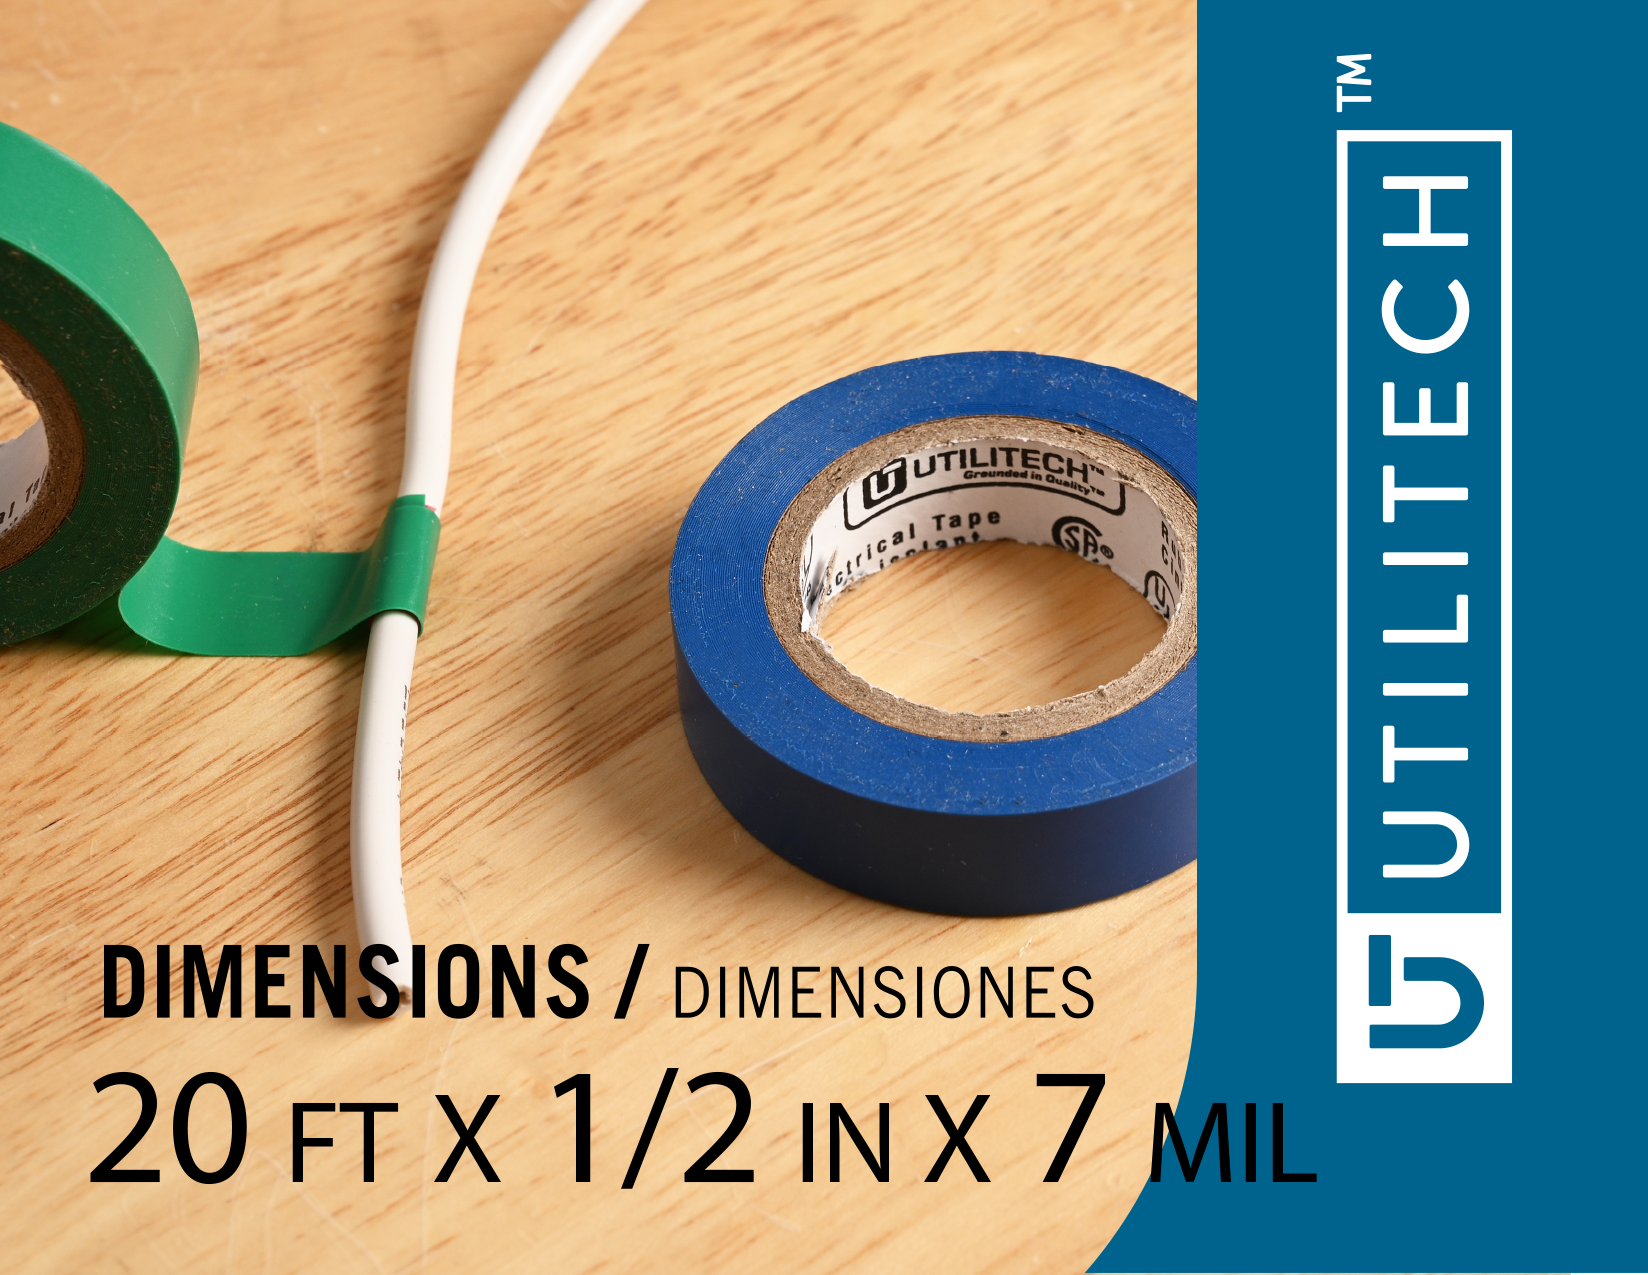 Utilitech 0.5-in x 20-ft Vinyl Electrical Tape Multiple Colors/Finishes  (6-Pack)